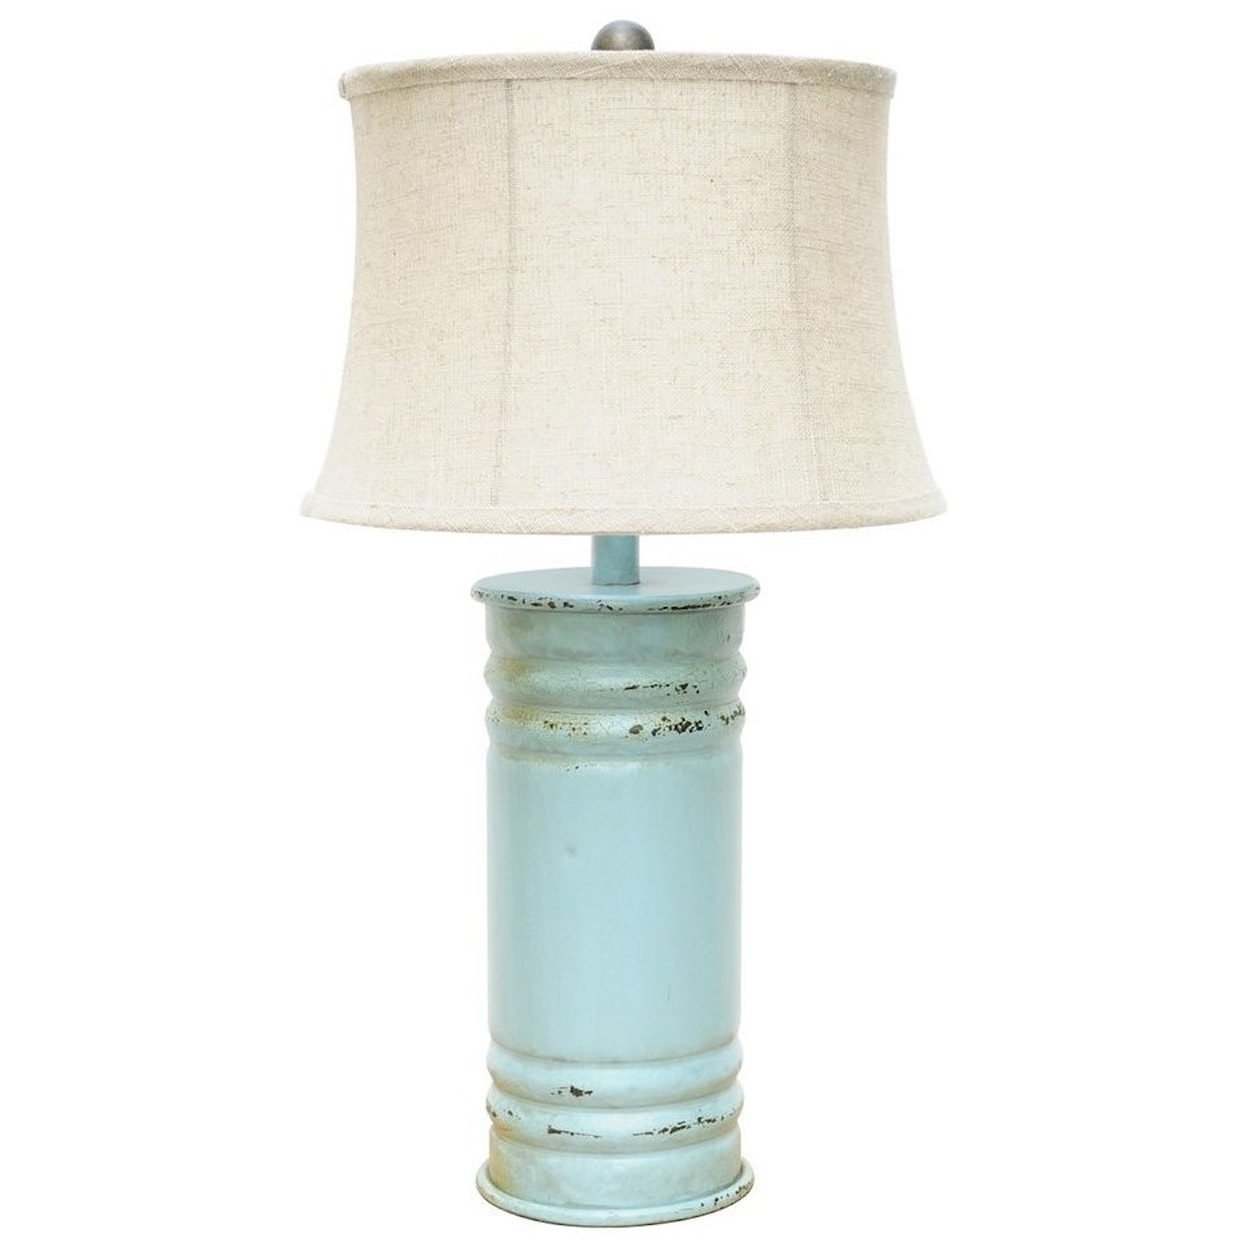 Crestview Collection Lighting Antique Can Table Lamp